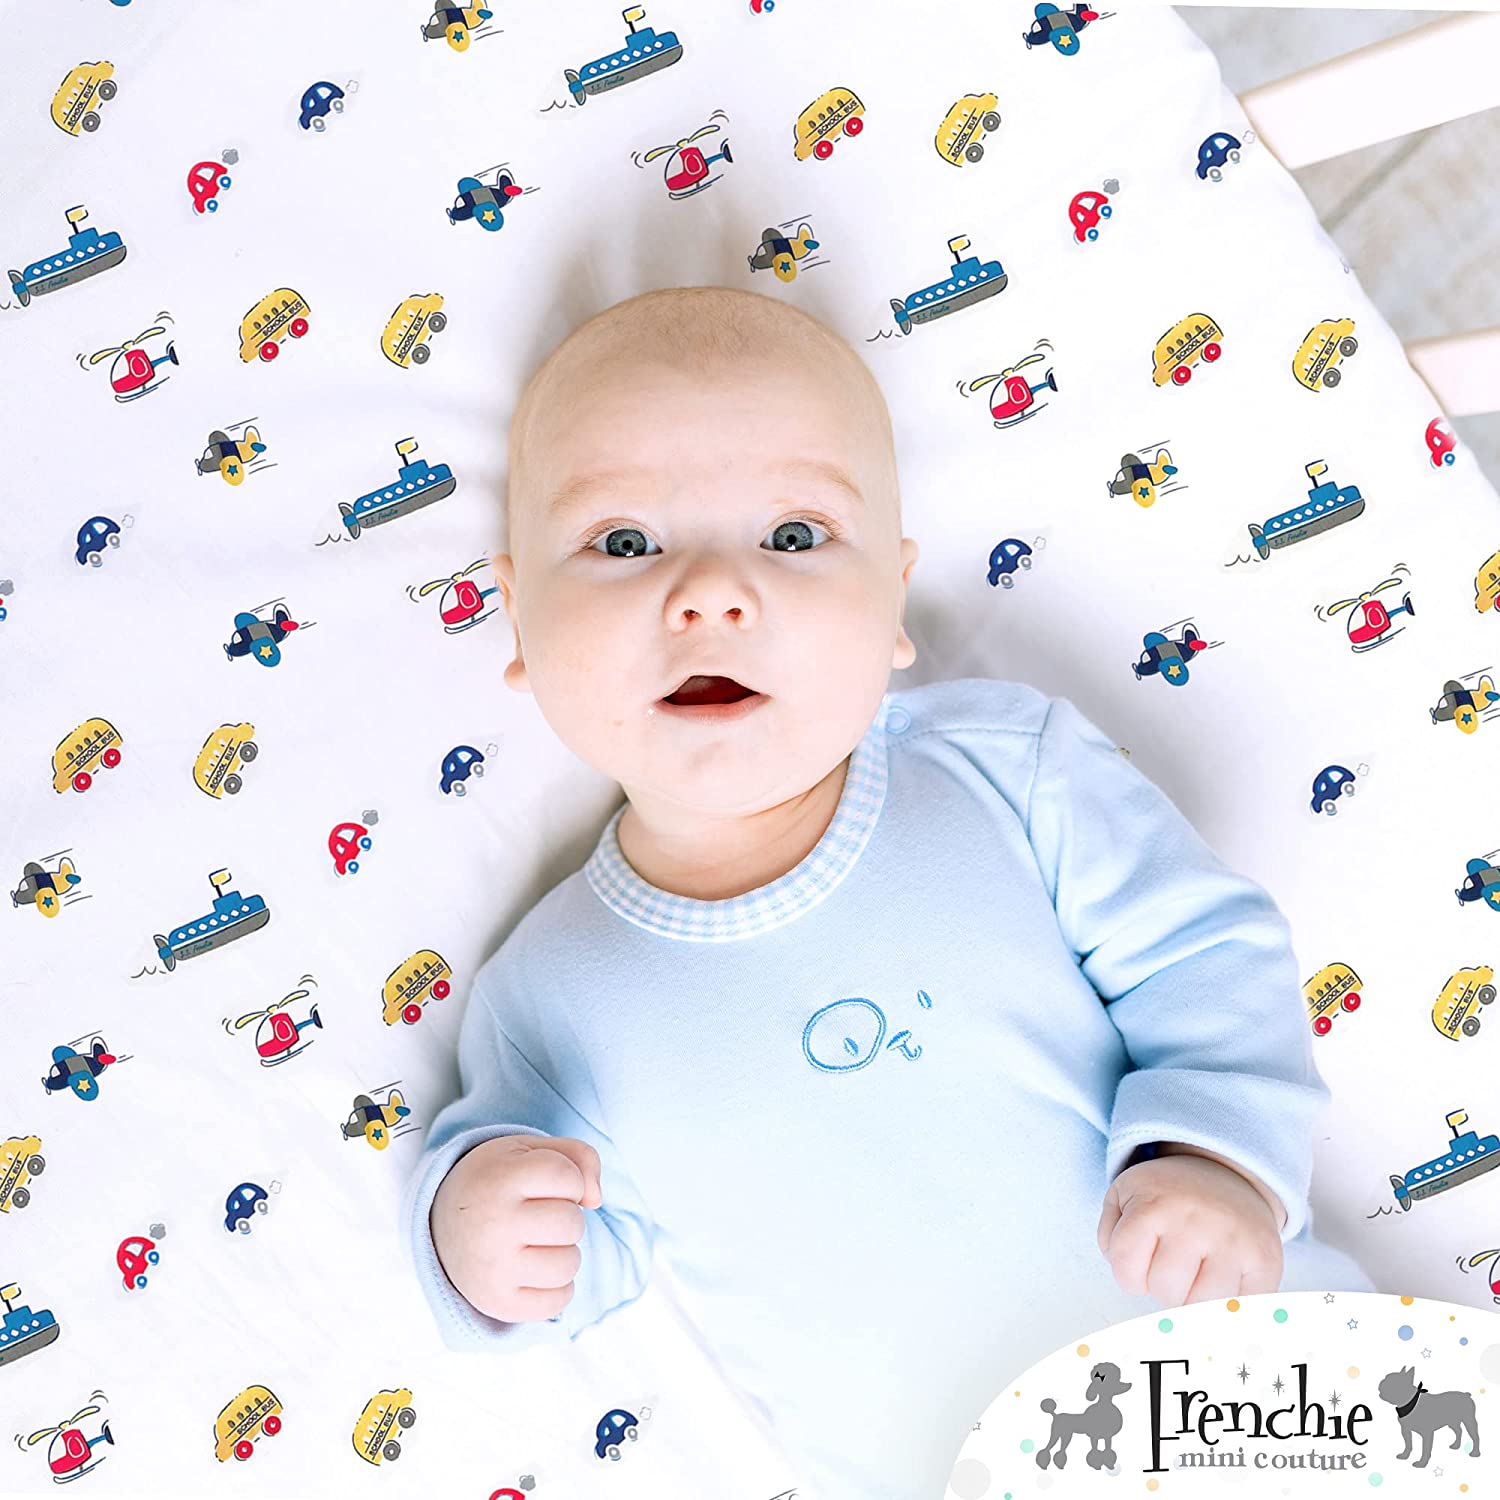 Planes, Cars and Boats - Single Pack Crib Sheets 100% Woven Cotton...